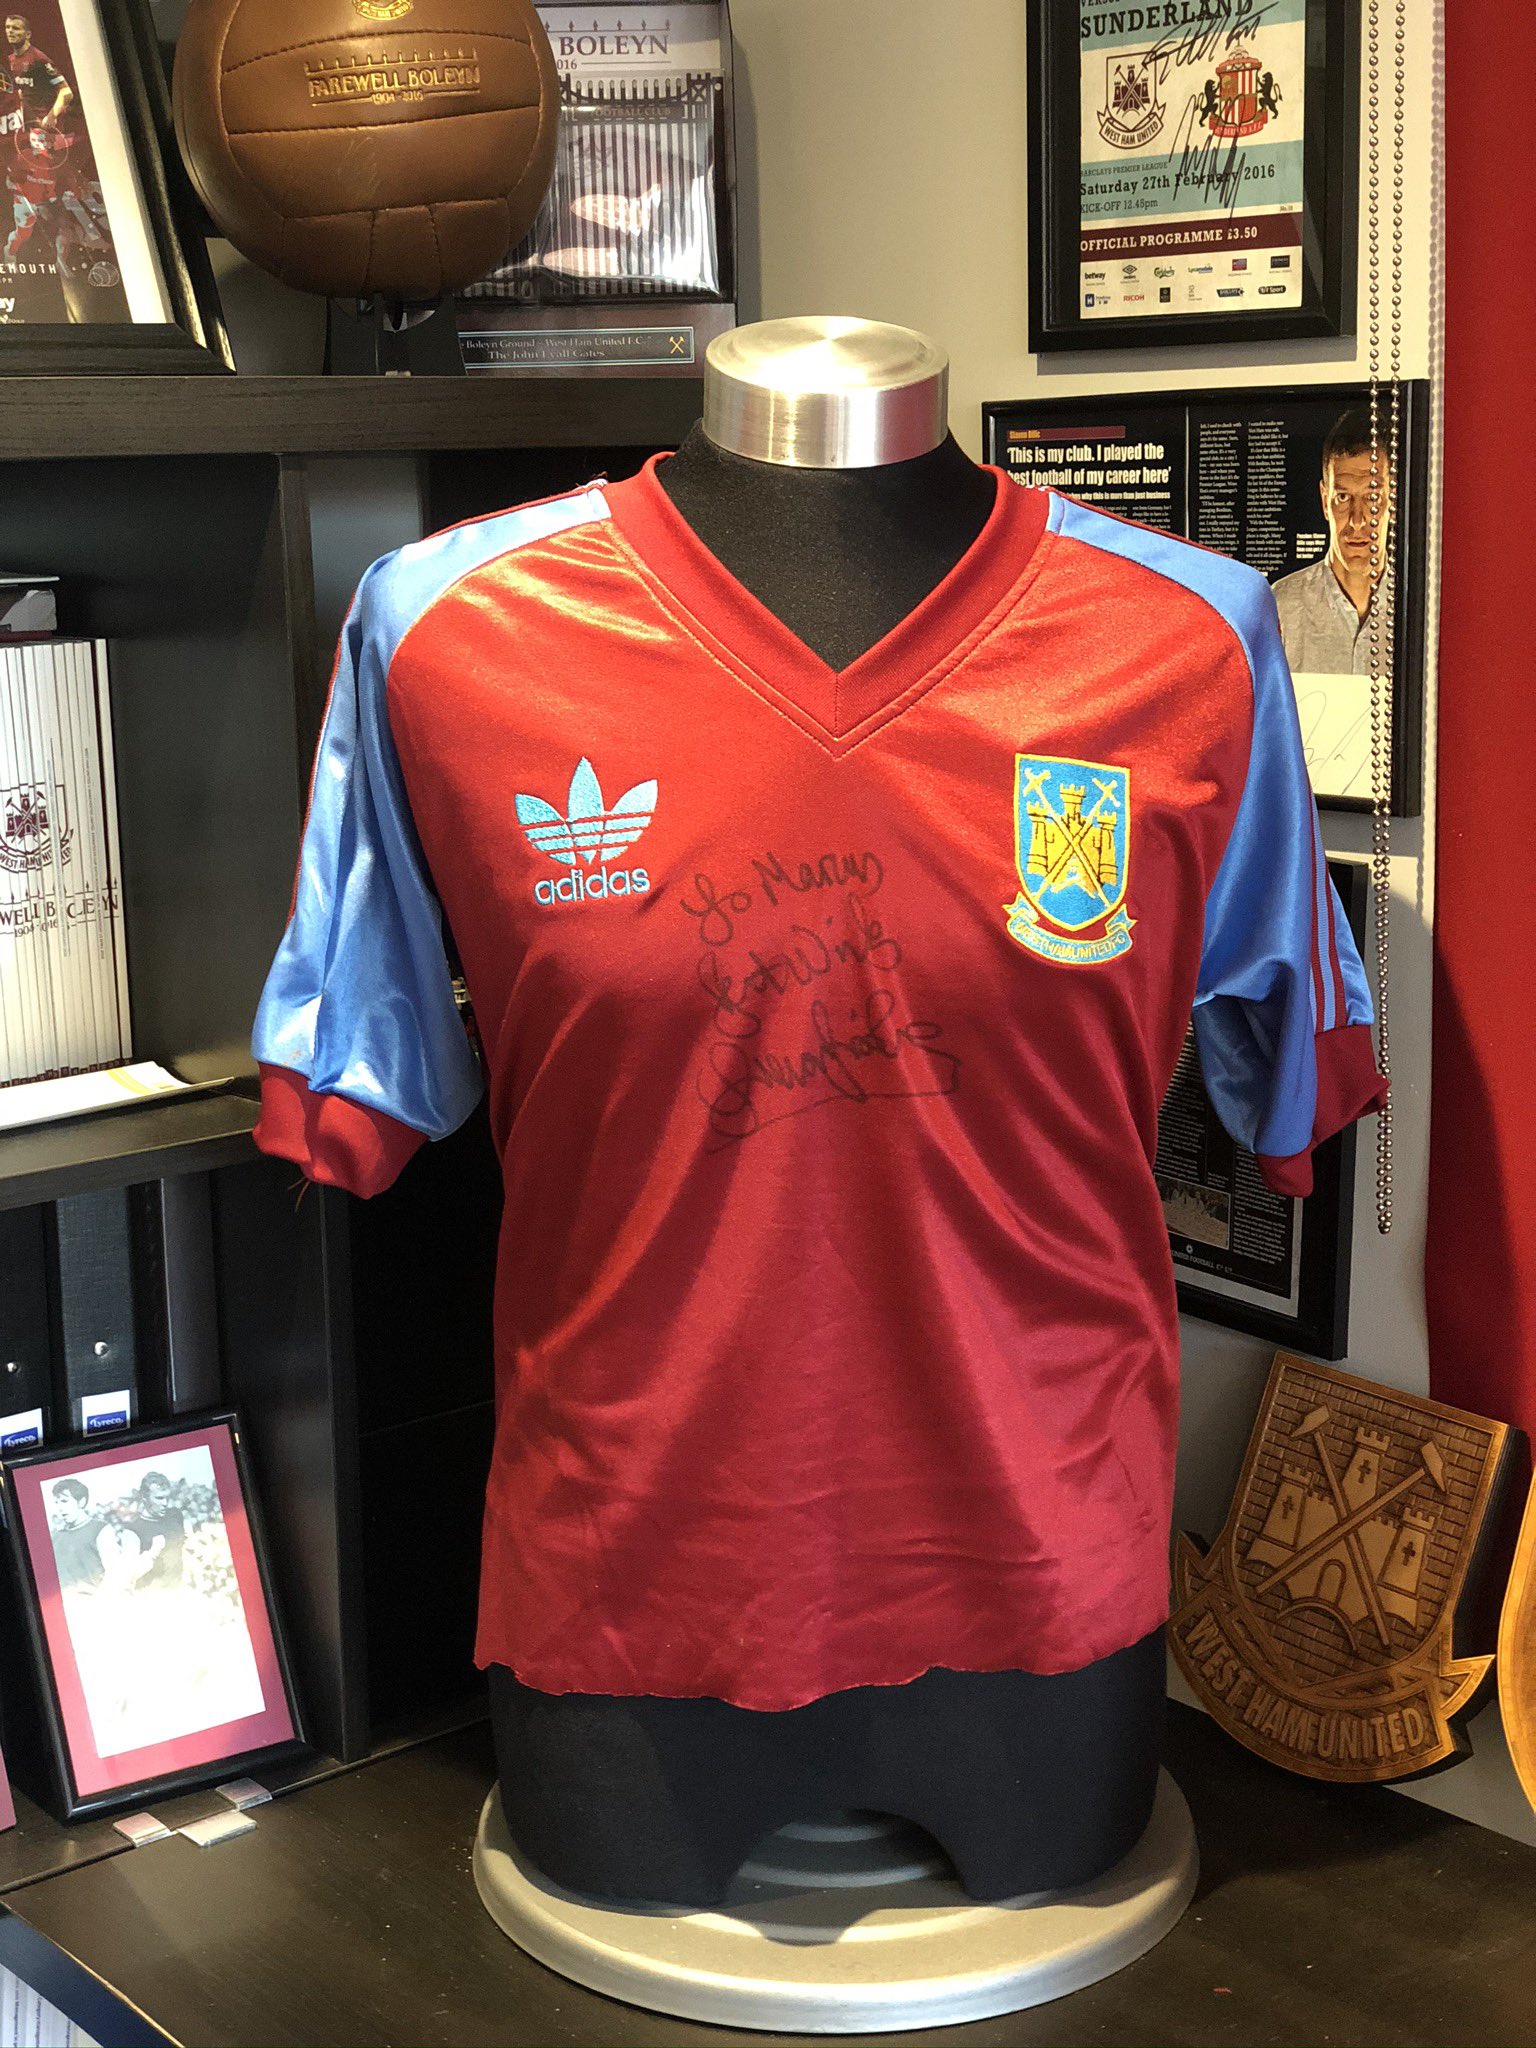 Classic Football Shirts on Twitter: "West Ham 1980 Home Adidas ⚒️ Simple and elegant. A https://t.co/xGr6qTM5cn" / Twitter